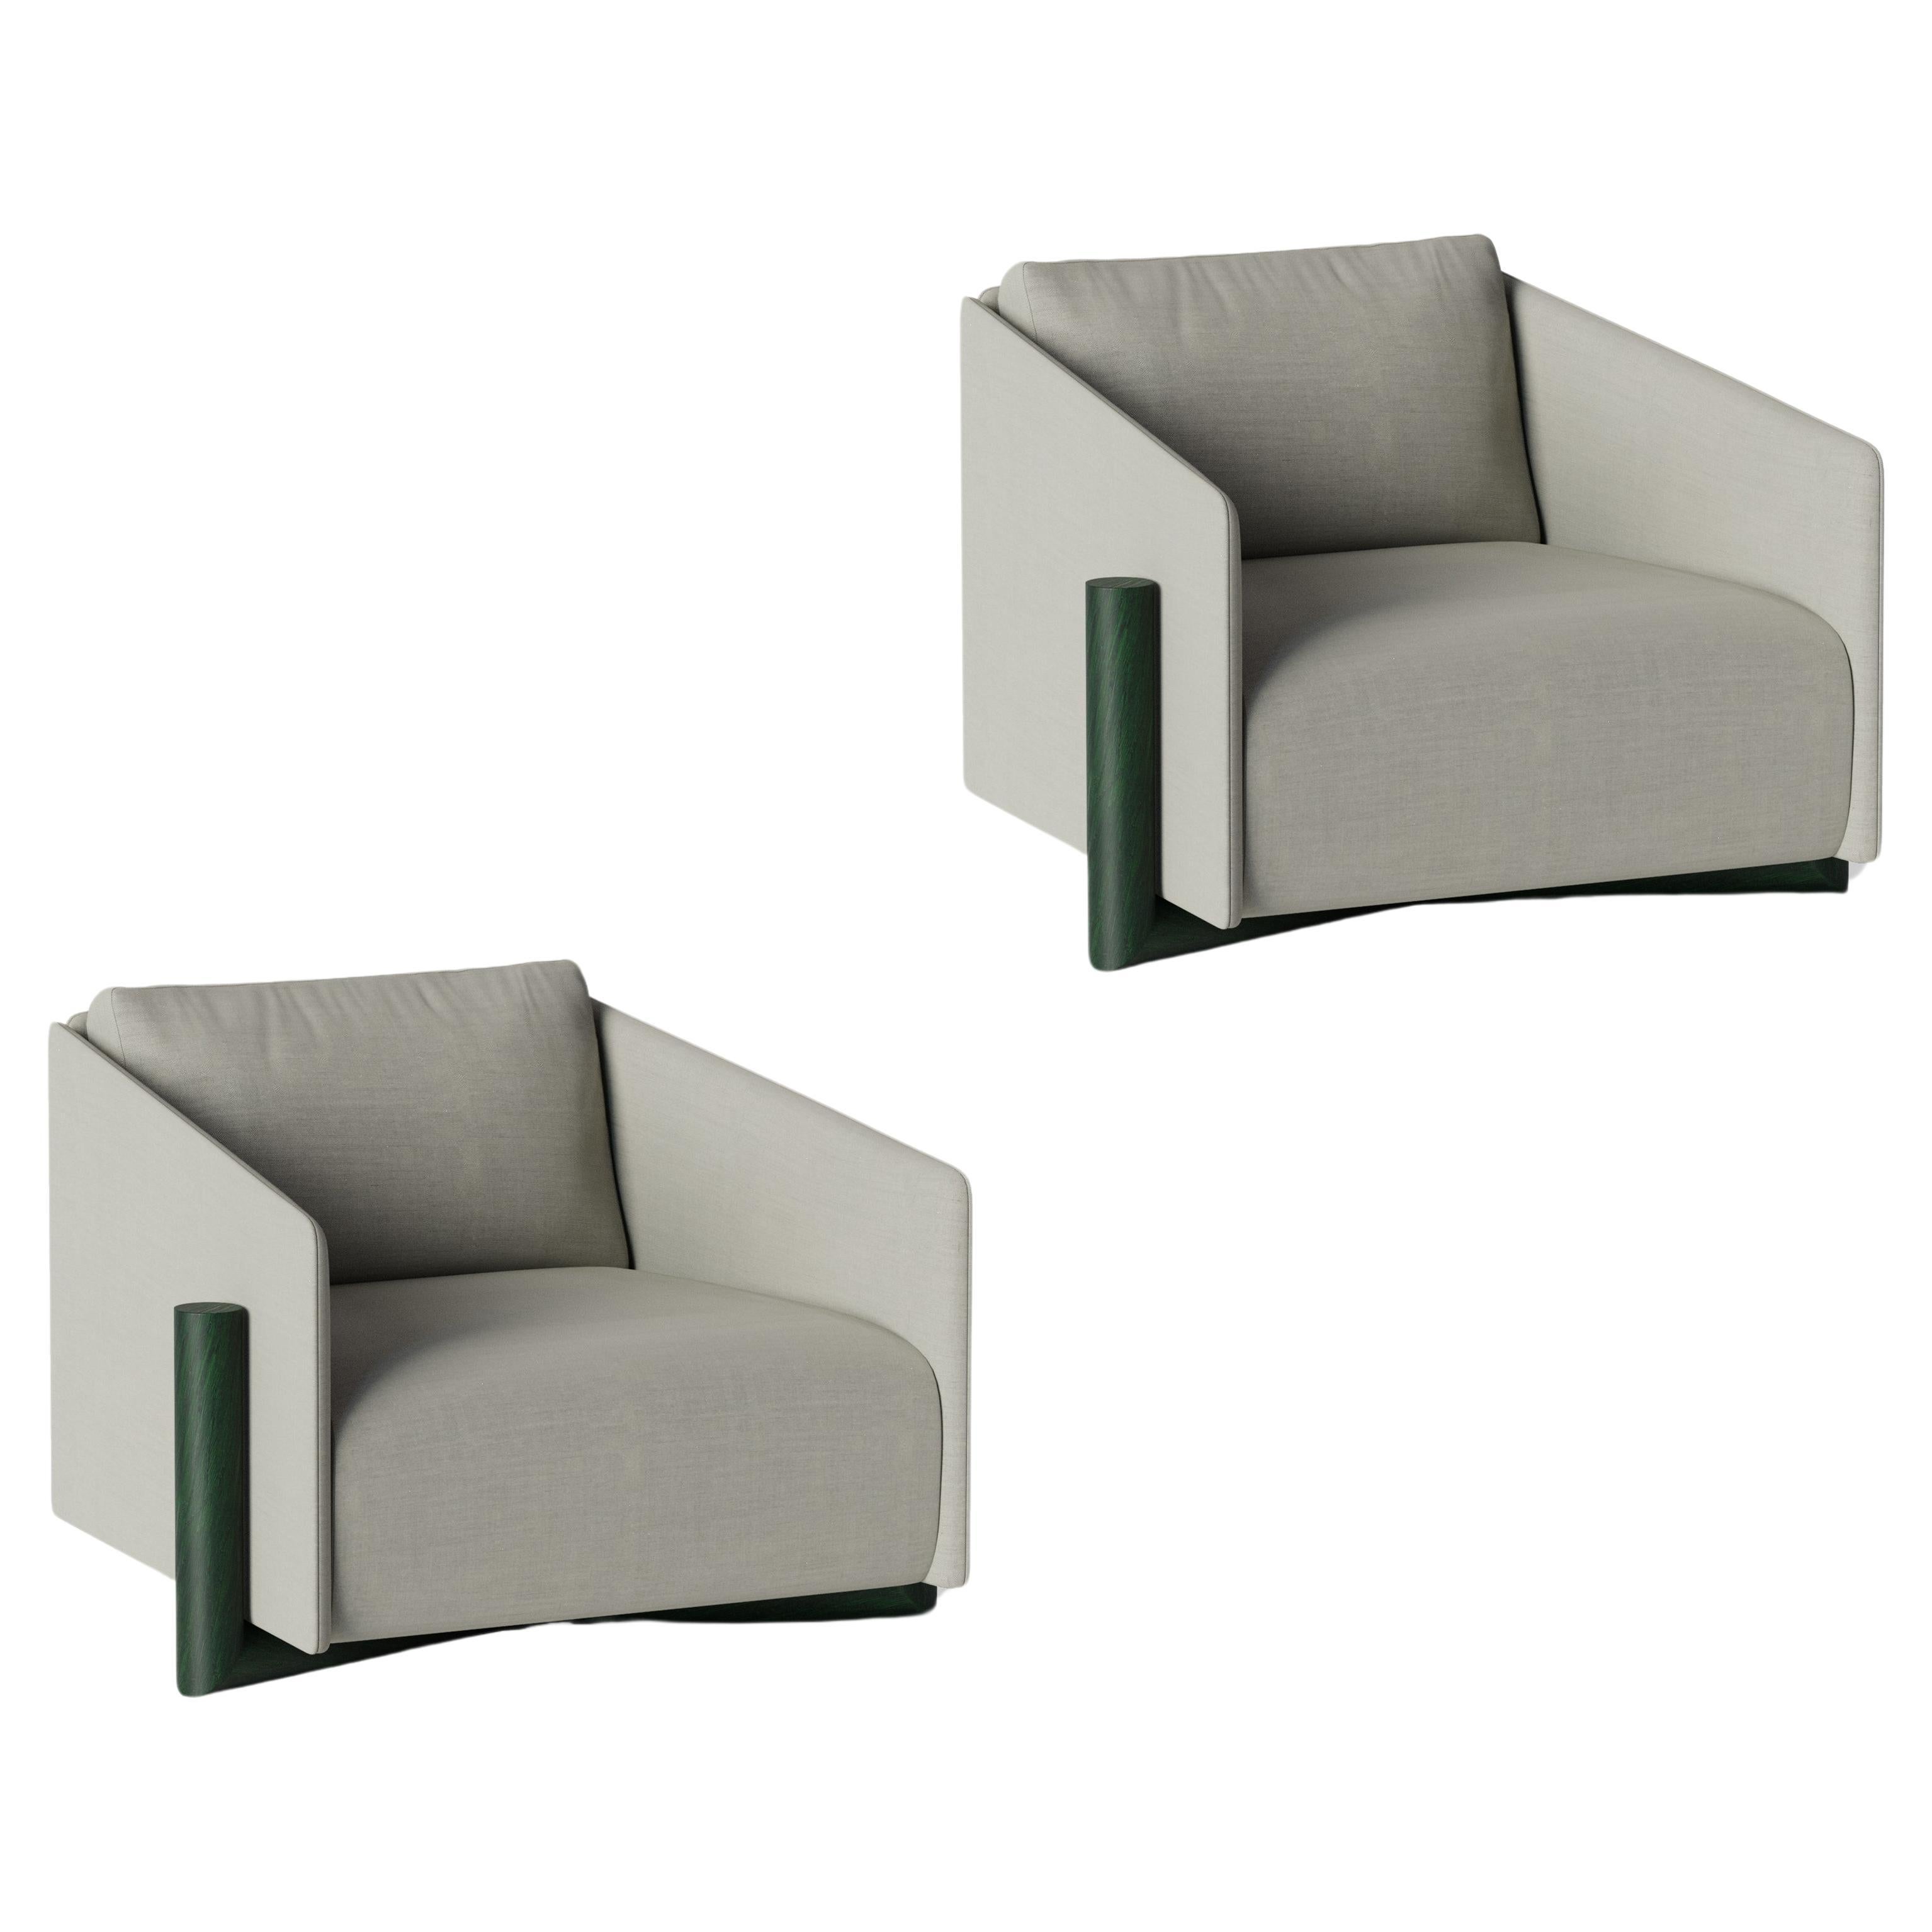 Set of 2 Grey Timber Armchair by Kann Design For Sale